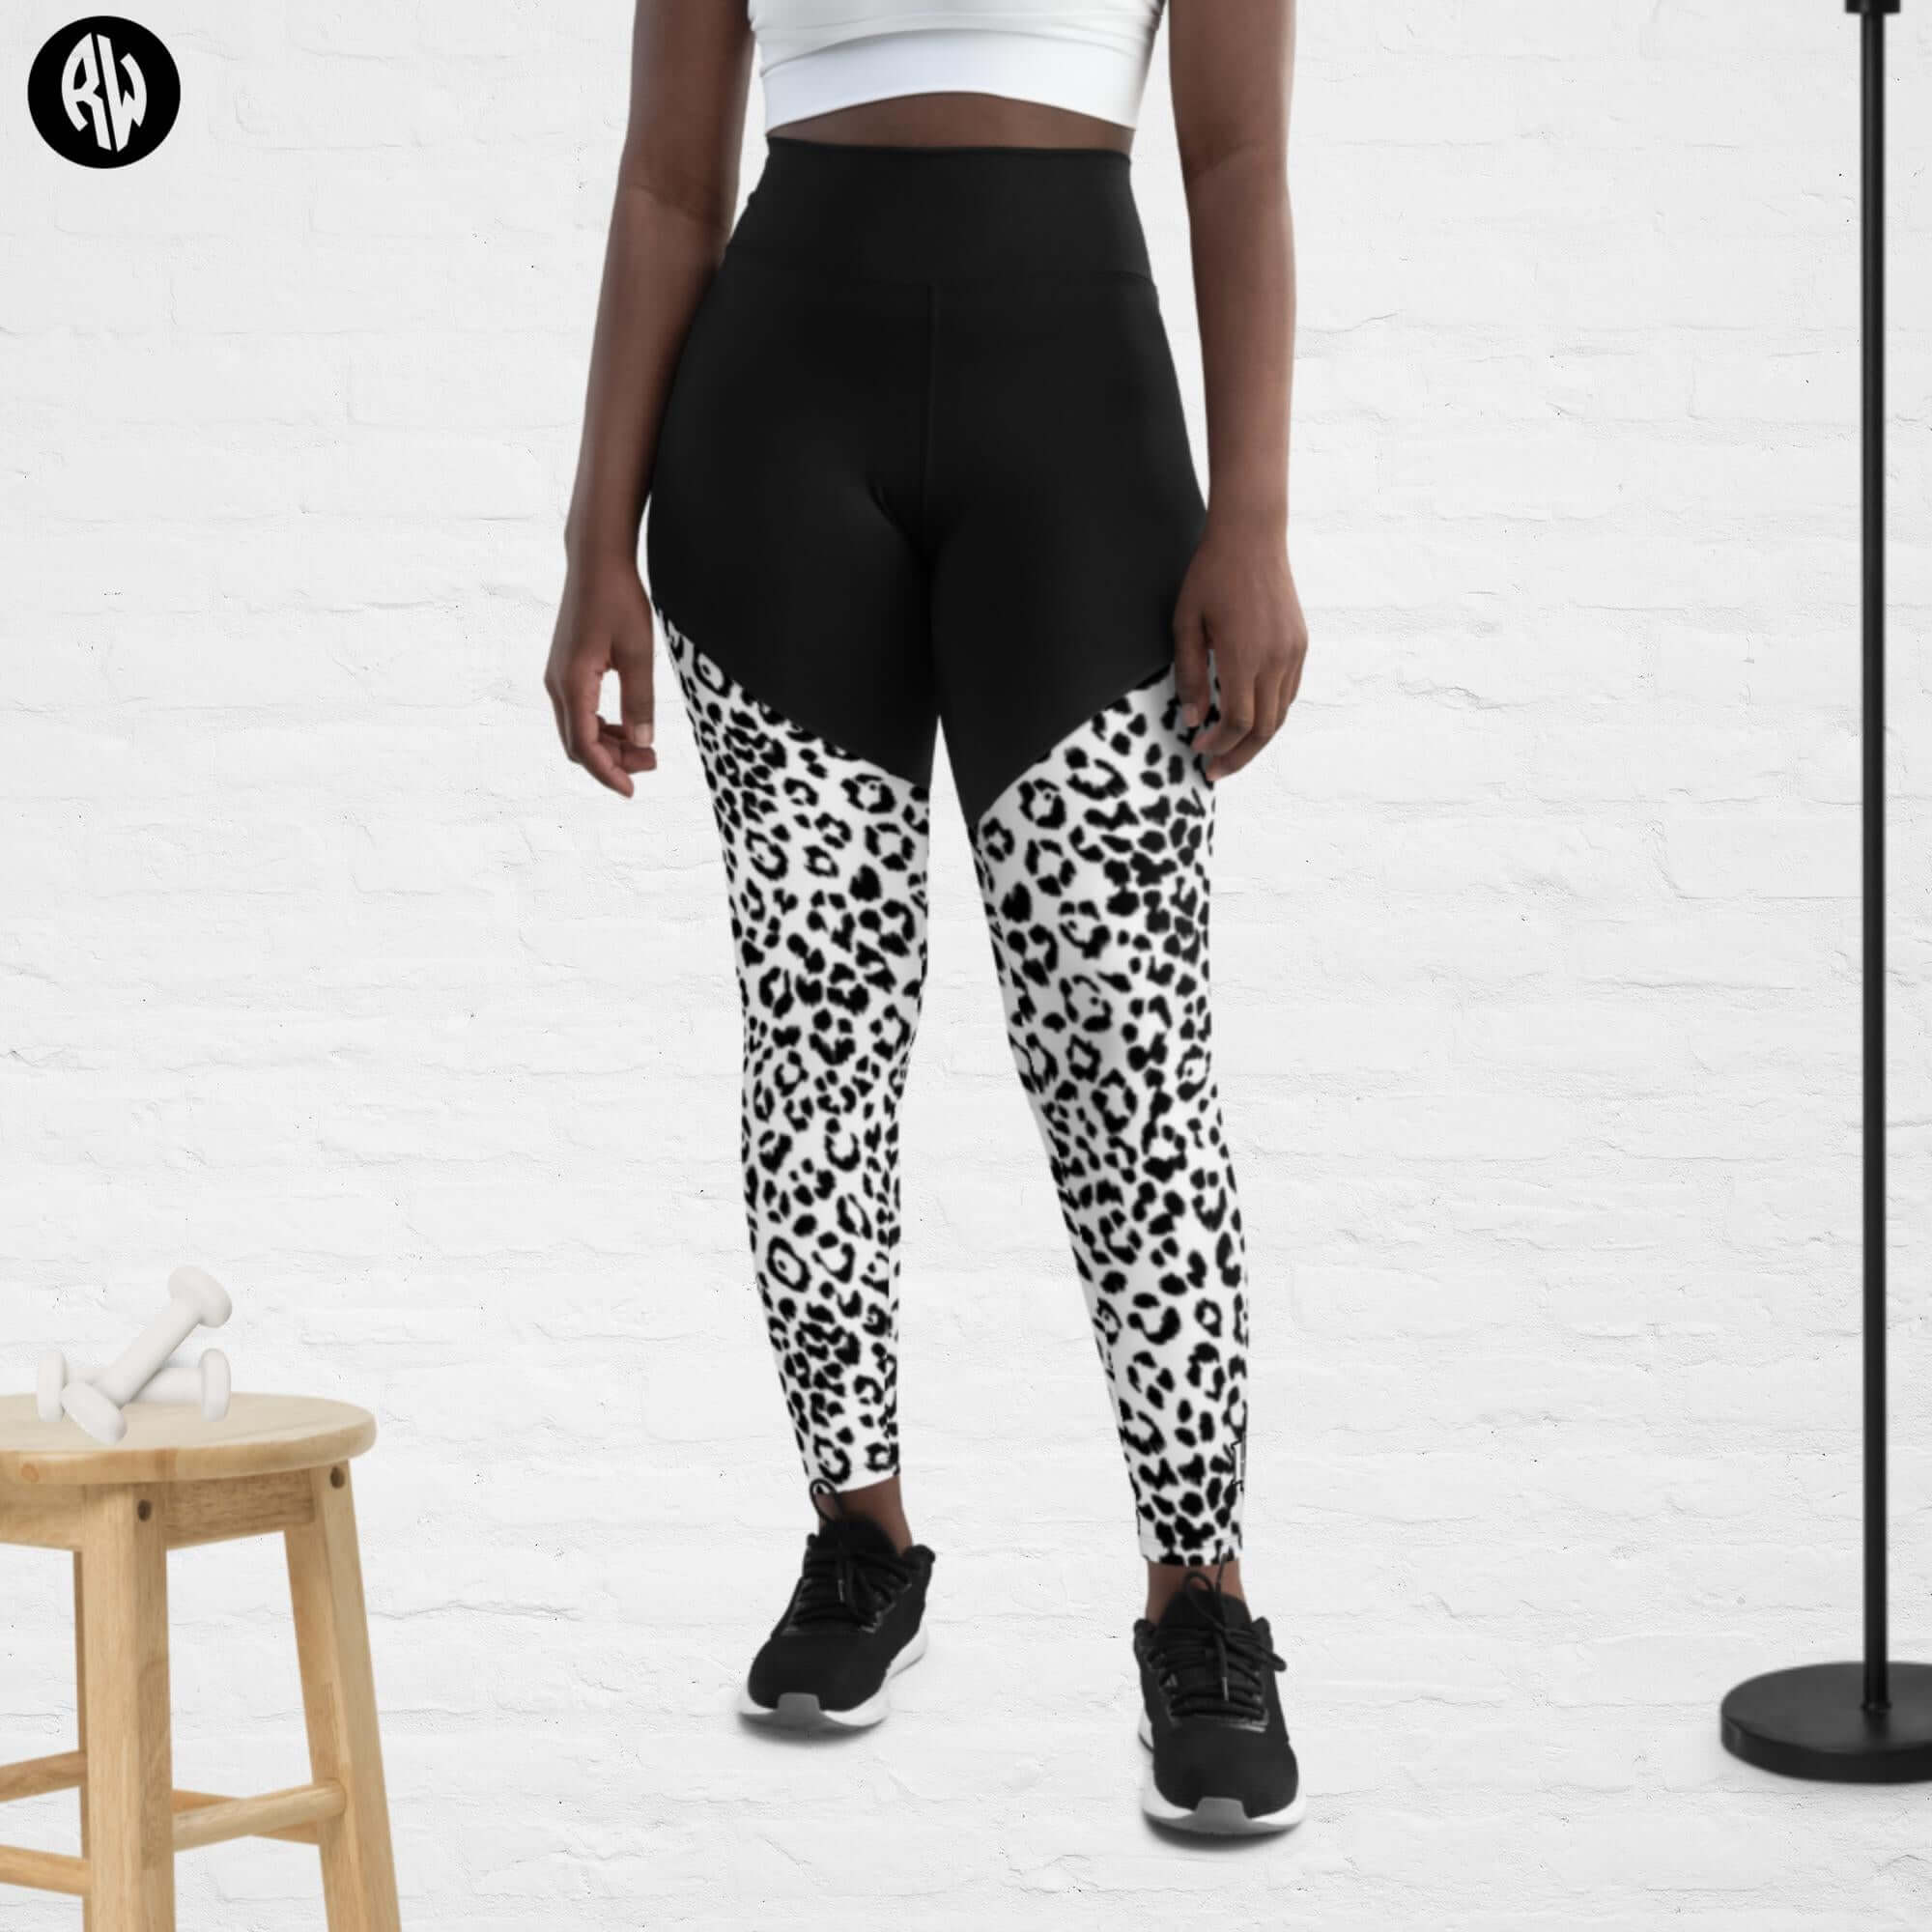 Sports Leggings with Phone Pocket in Black and White Print - Revive Wear     Enhance your workouts with Revive Wear AU's Sports Leggings featuring a convenient phone pocket. Stay connected and stylish during your fitness routine. Shop now!